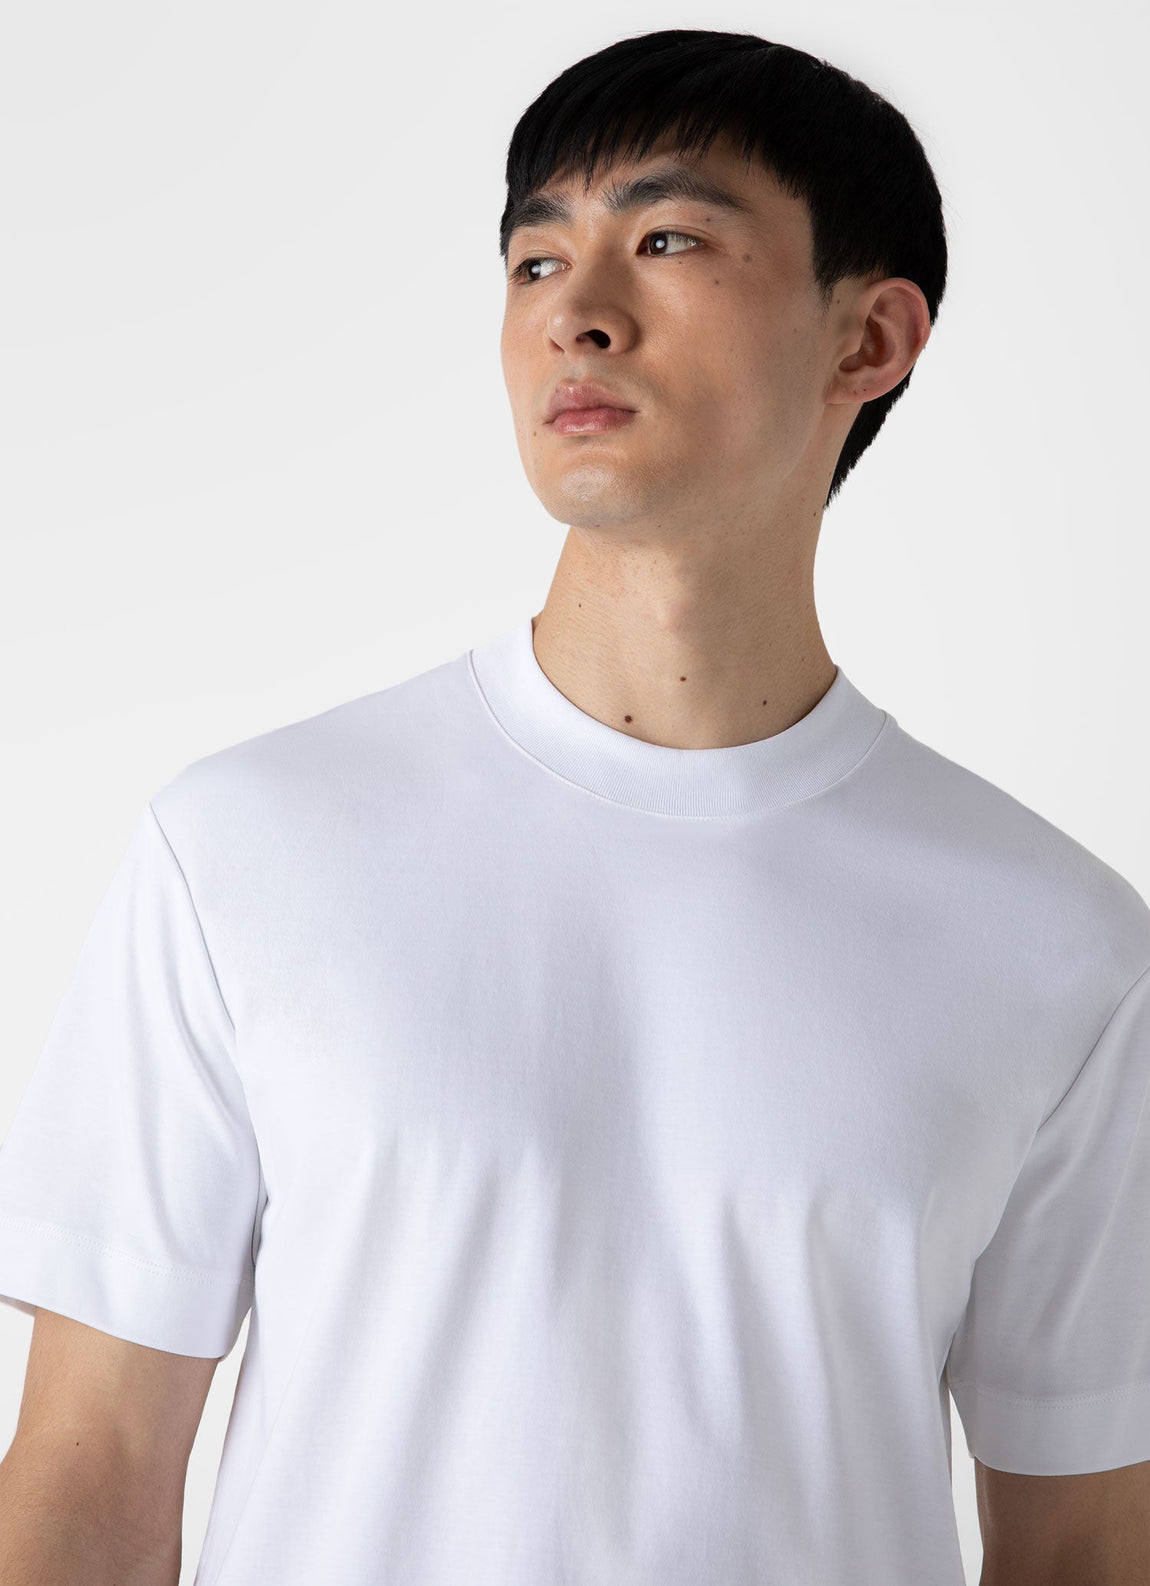 Men's Brushed Cotton T-shirt in White